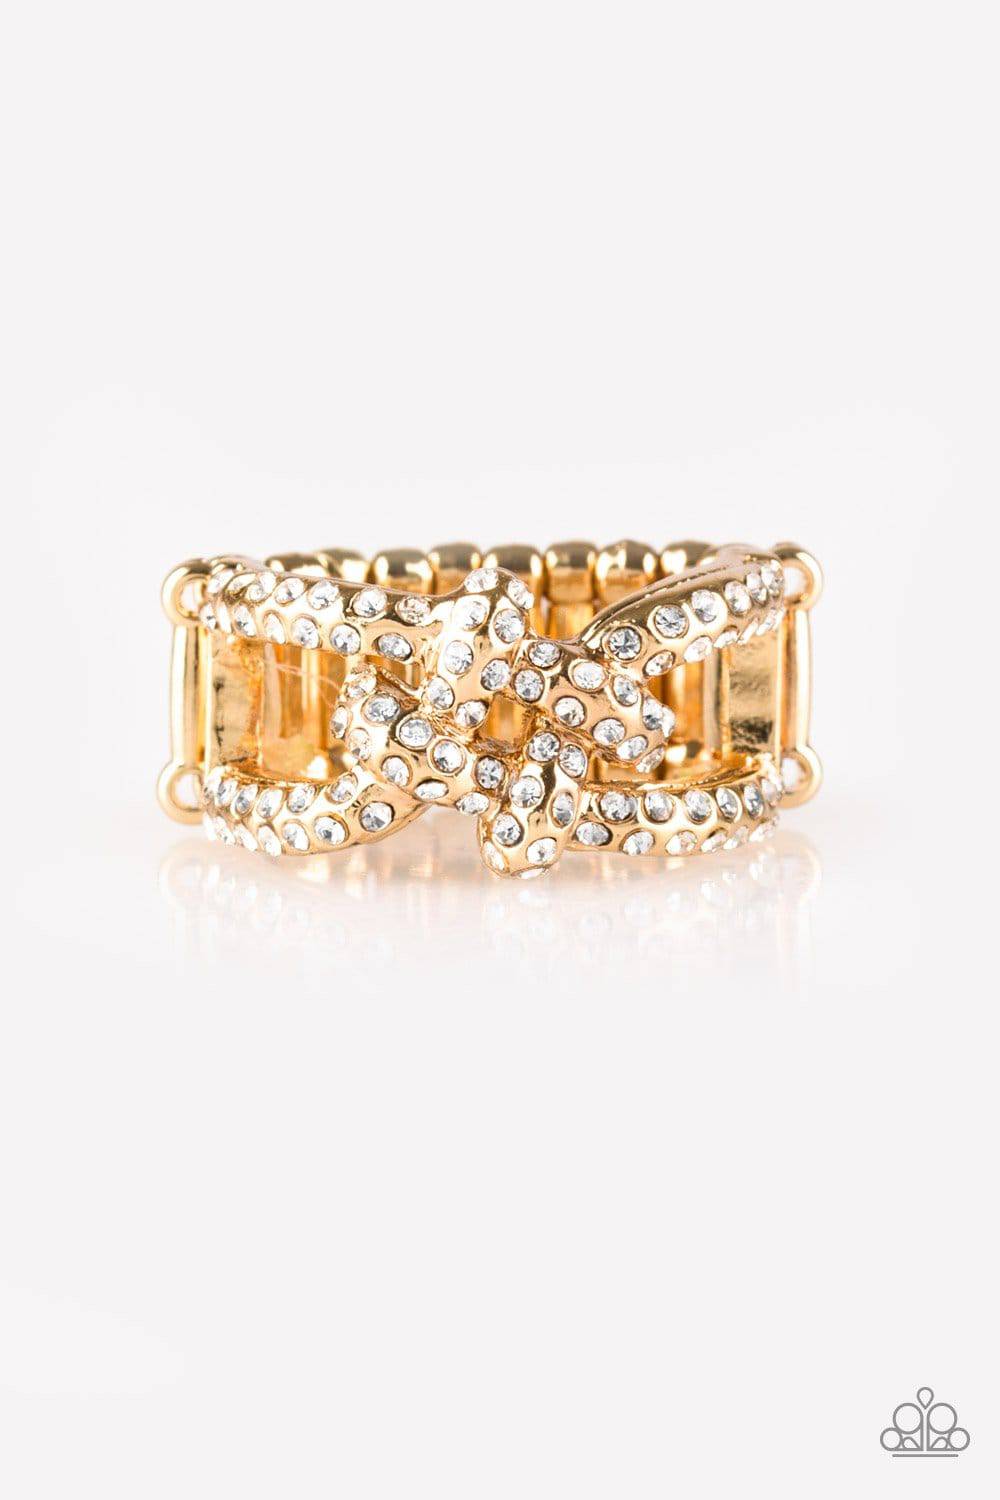 C9 - Can Only go UPSCALE From Here Ring by Paparazzi Accessories on Fancy5Fashion.com